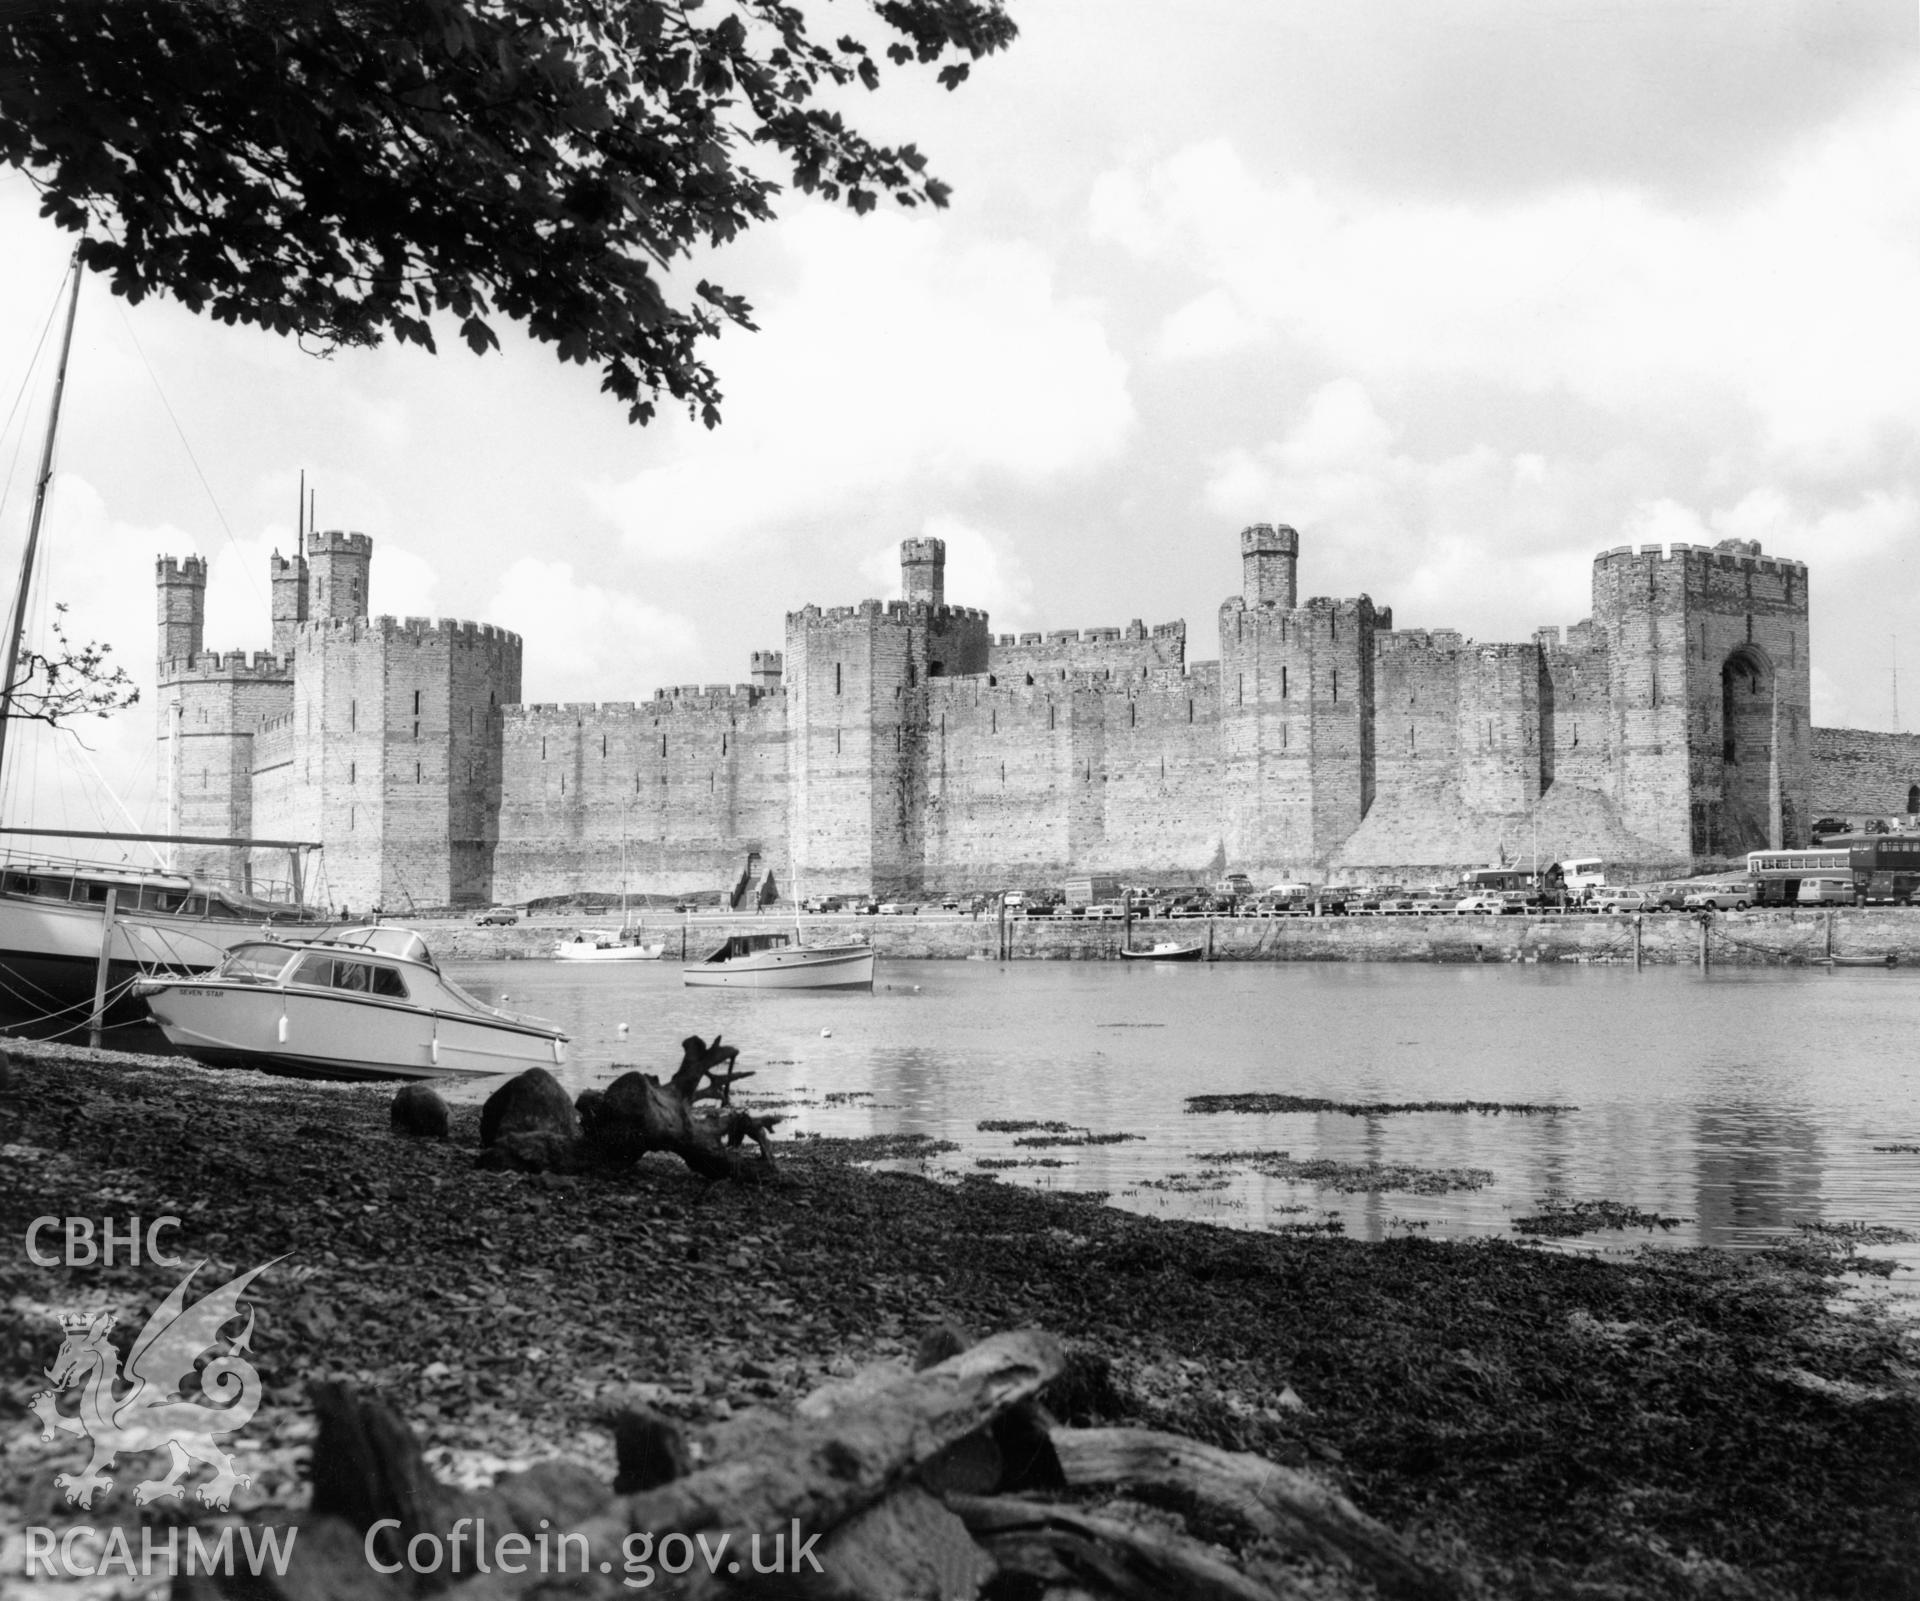 1 b/w print showing view of Caernarfon castle, collated by the former Central Office of Information.